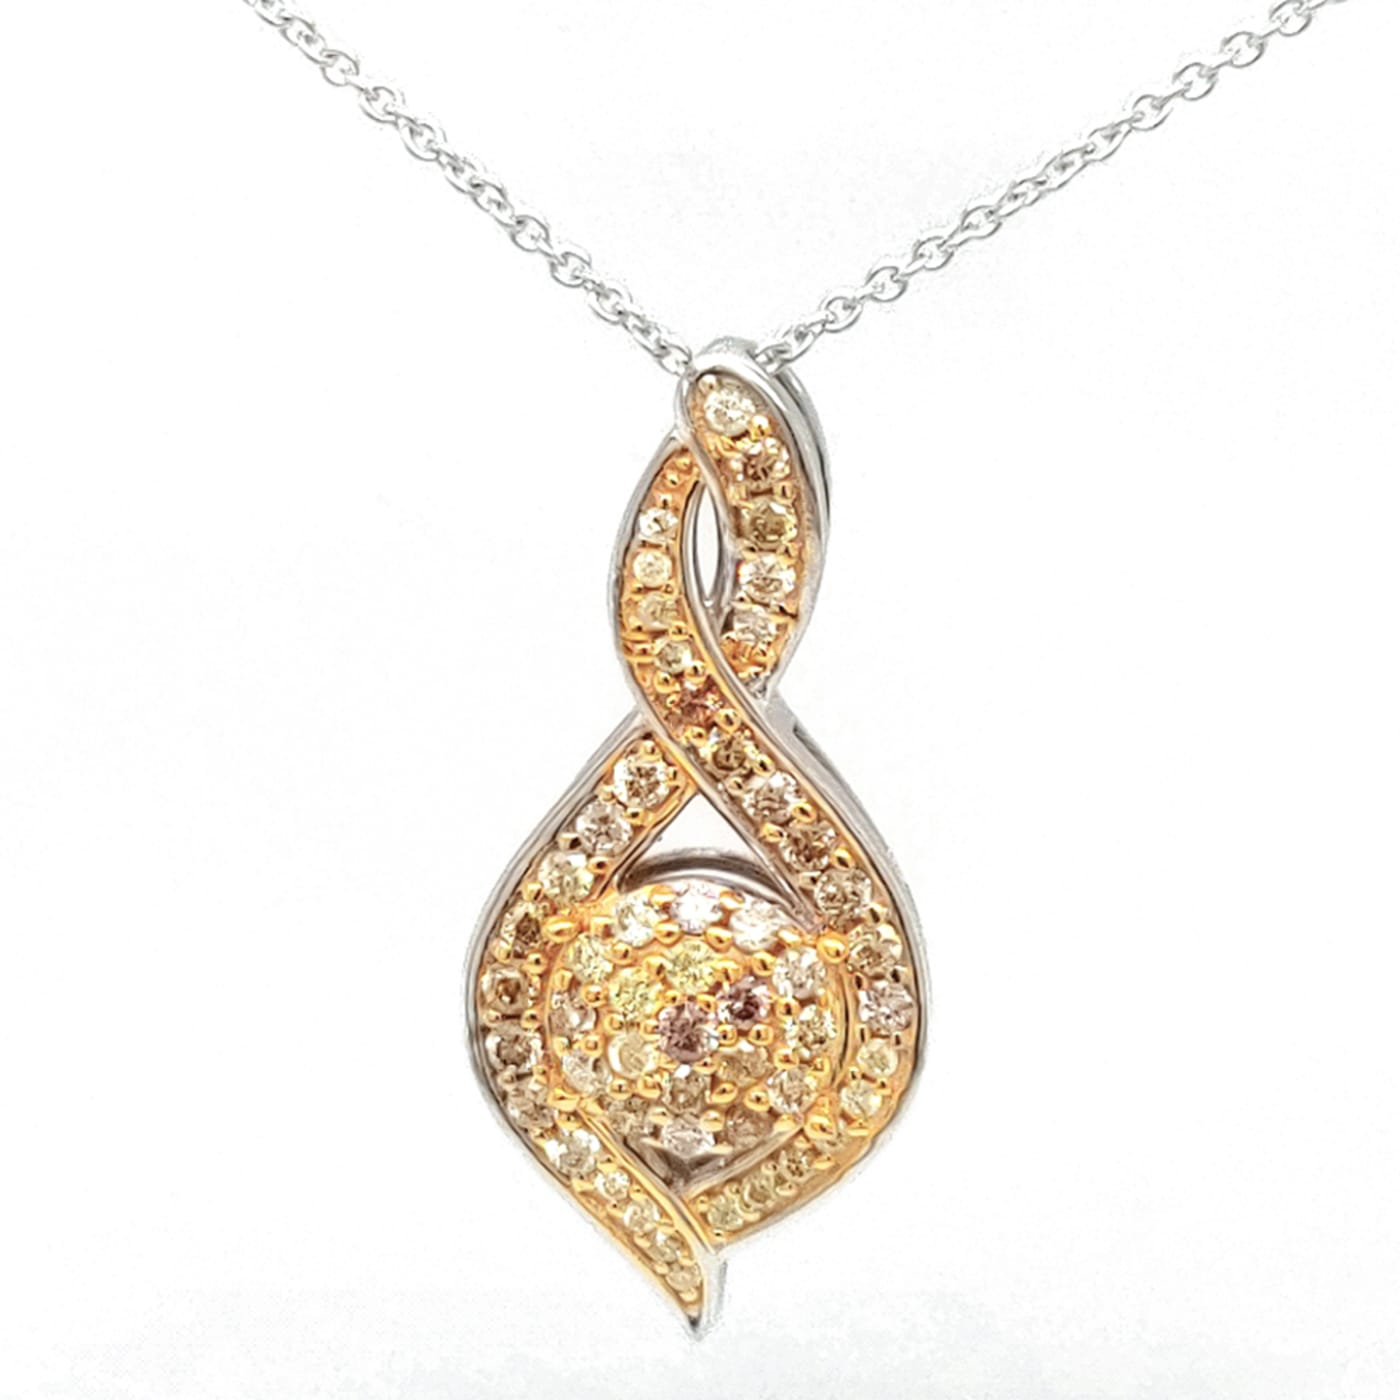 LÚDERE 14K Gold Angular Pendant Necklace Lined with Diamond or White Sapphire Mirror Pave on A 1mm Rolo Chain Diamond